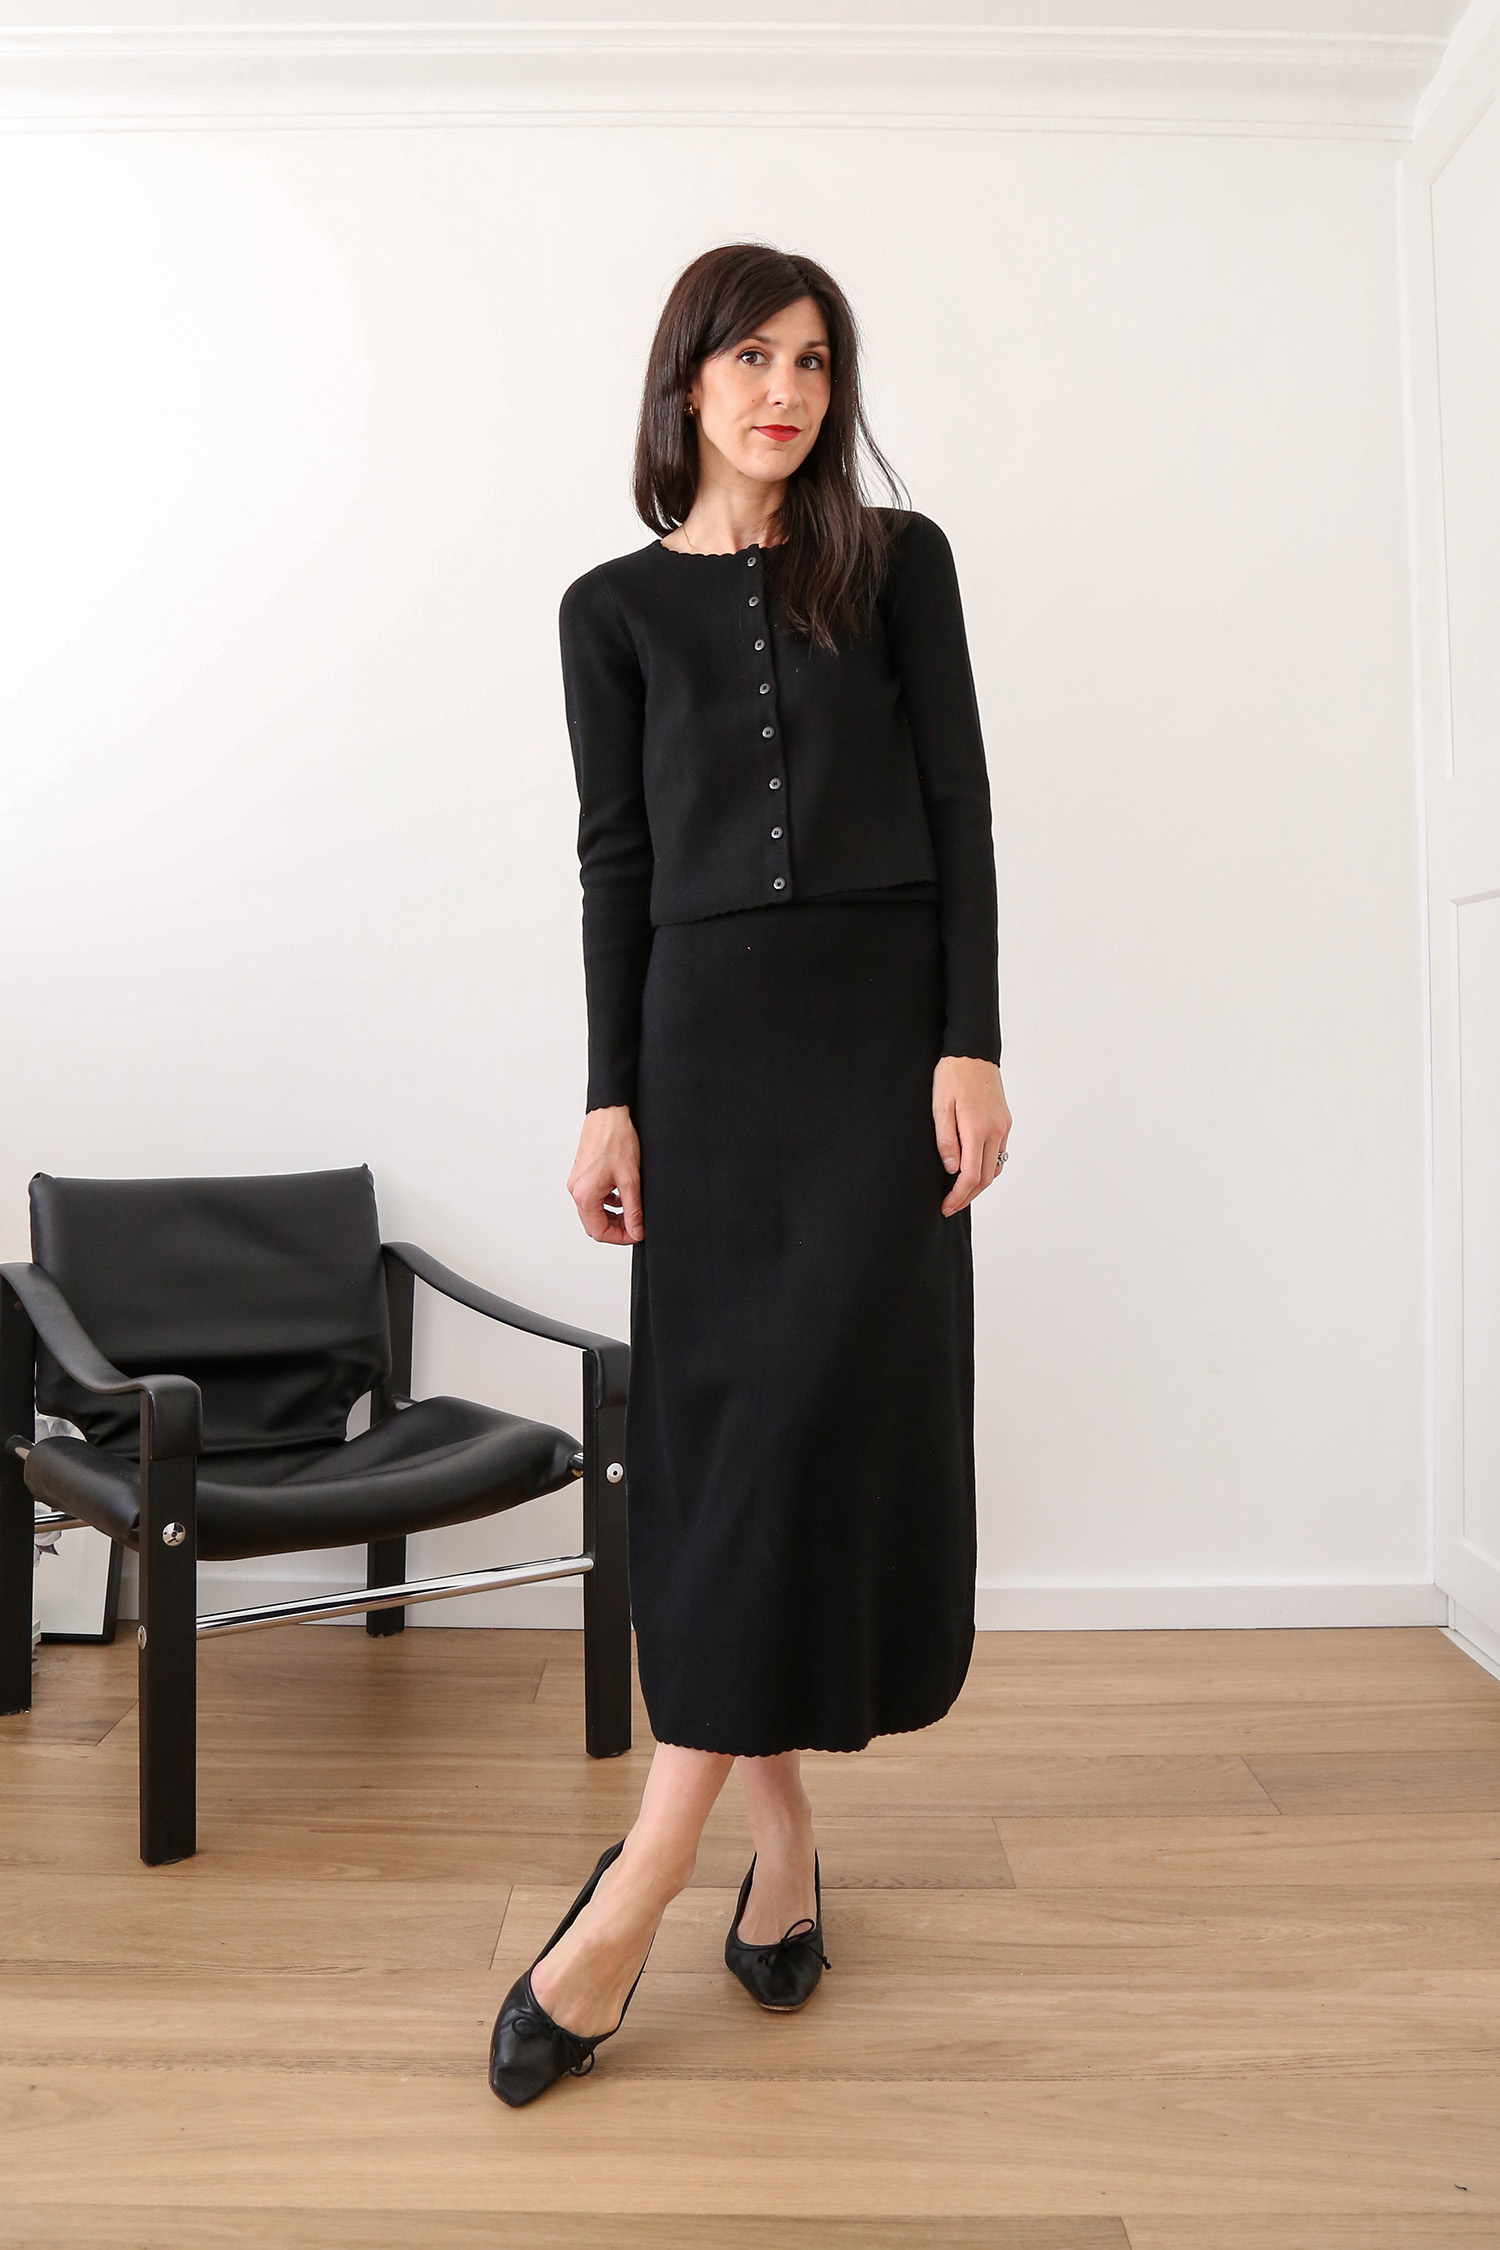 Sezane Suzie Top Elie Cardigan and Francine Skirt Review